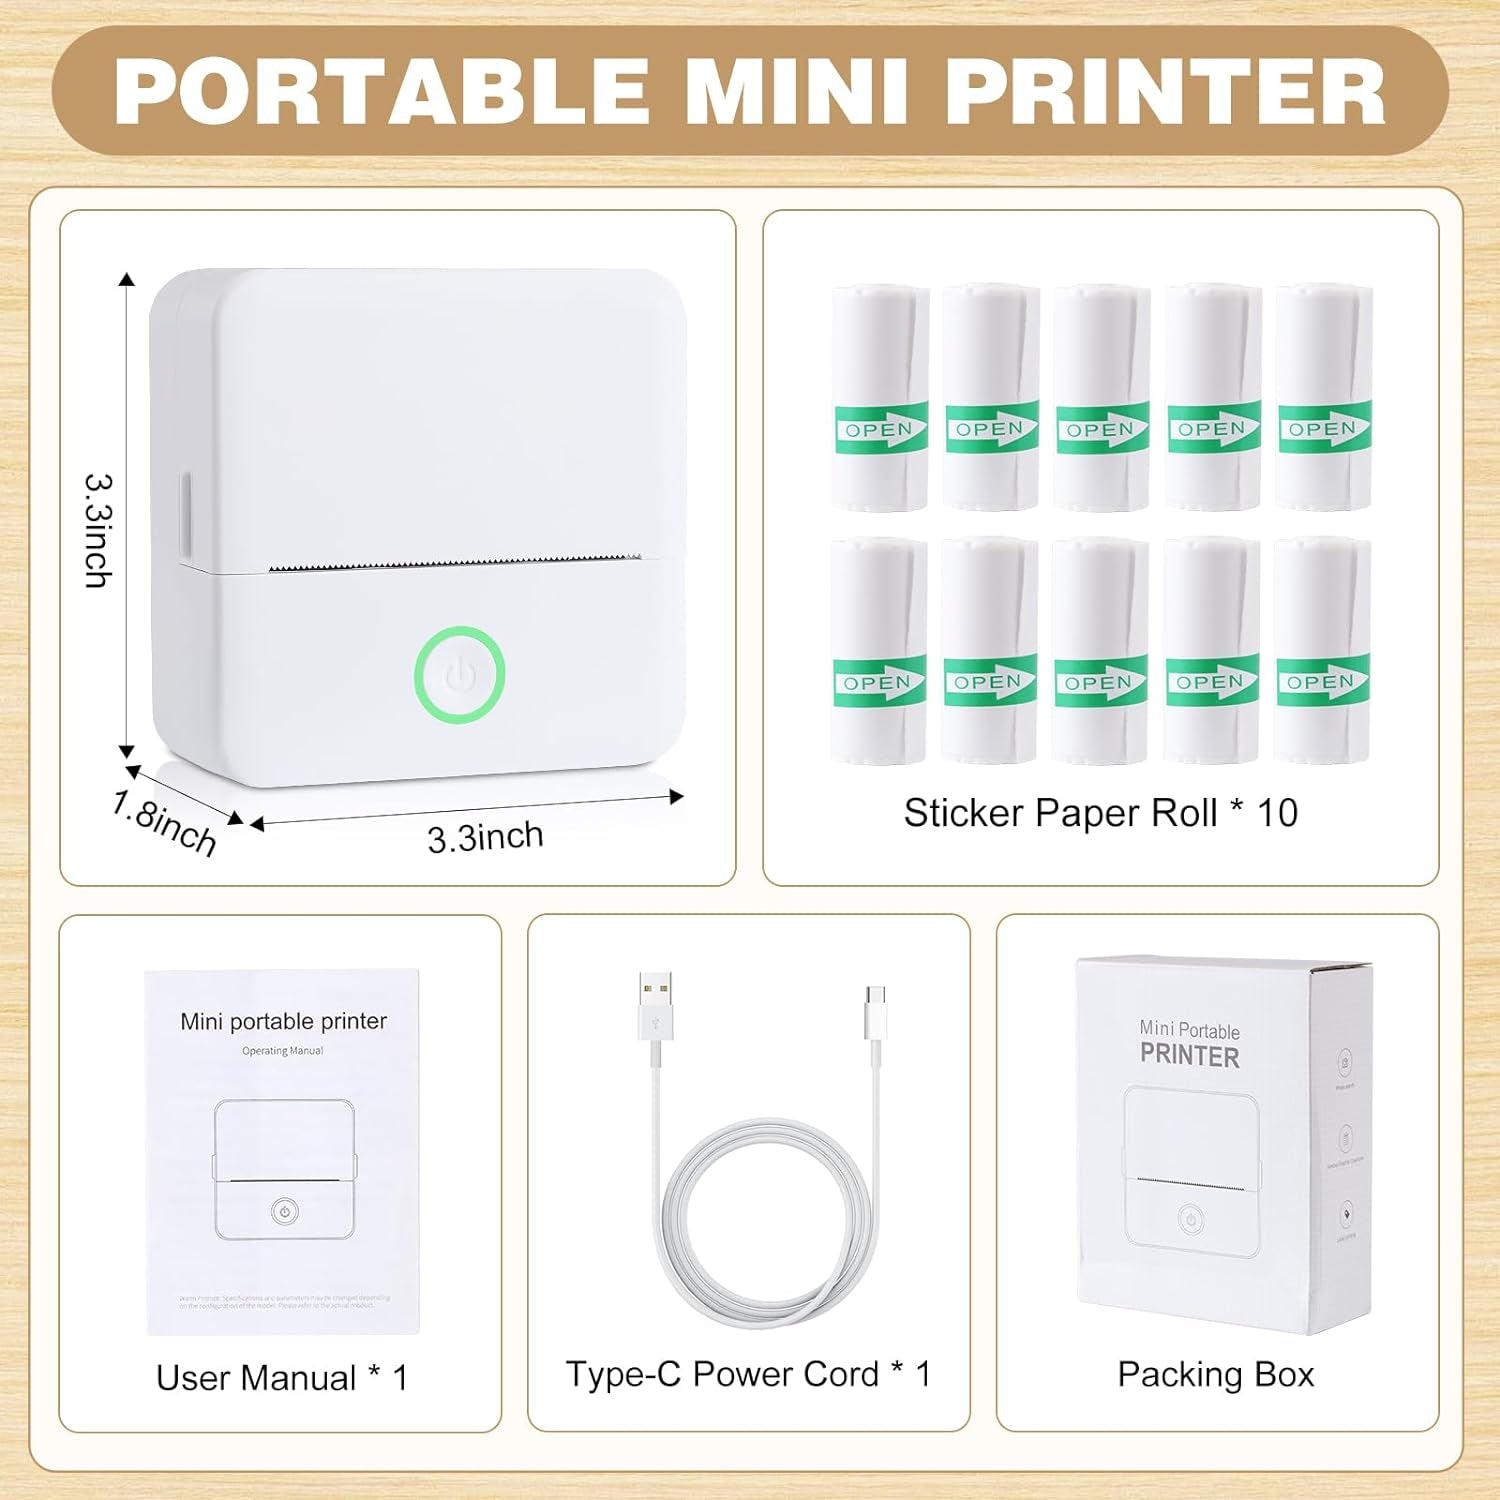 Thermal Mini Printer, Portable Inkless Sticker Maker, Bluetooth Printer for Phone, Wireless Label Printer with Tape, Free Cut Small Pocket Printer for Notes&Children DIY, Compatible with Ios&Android